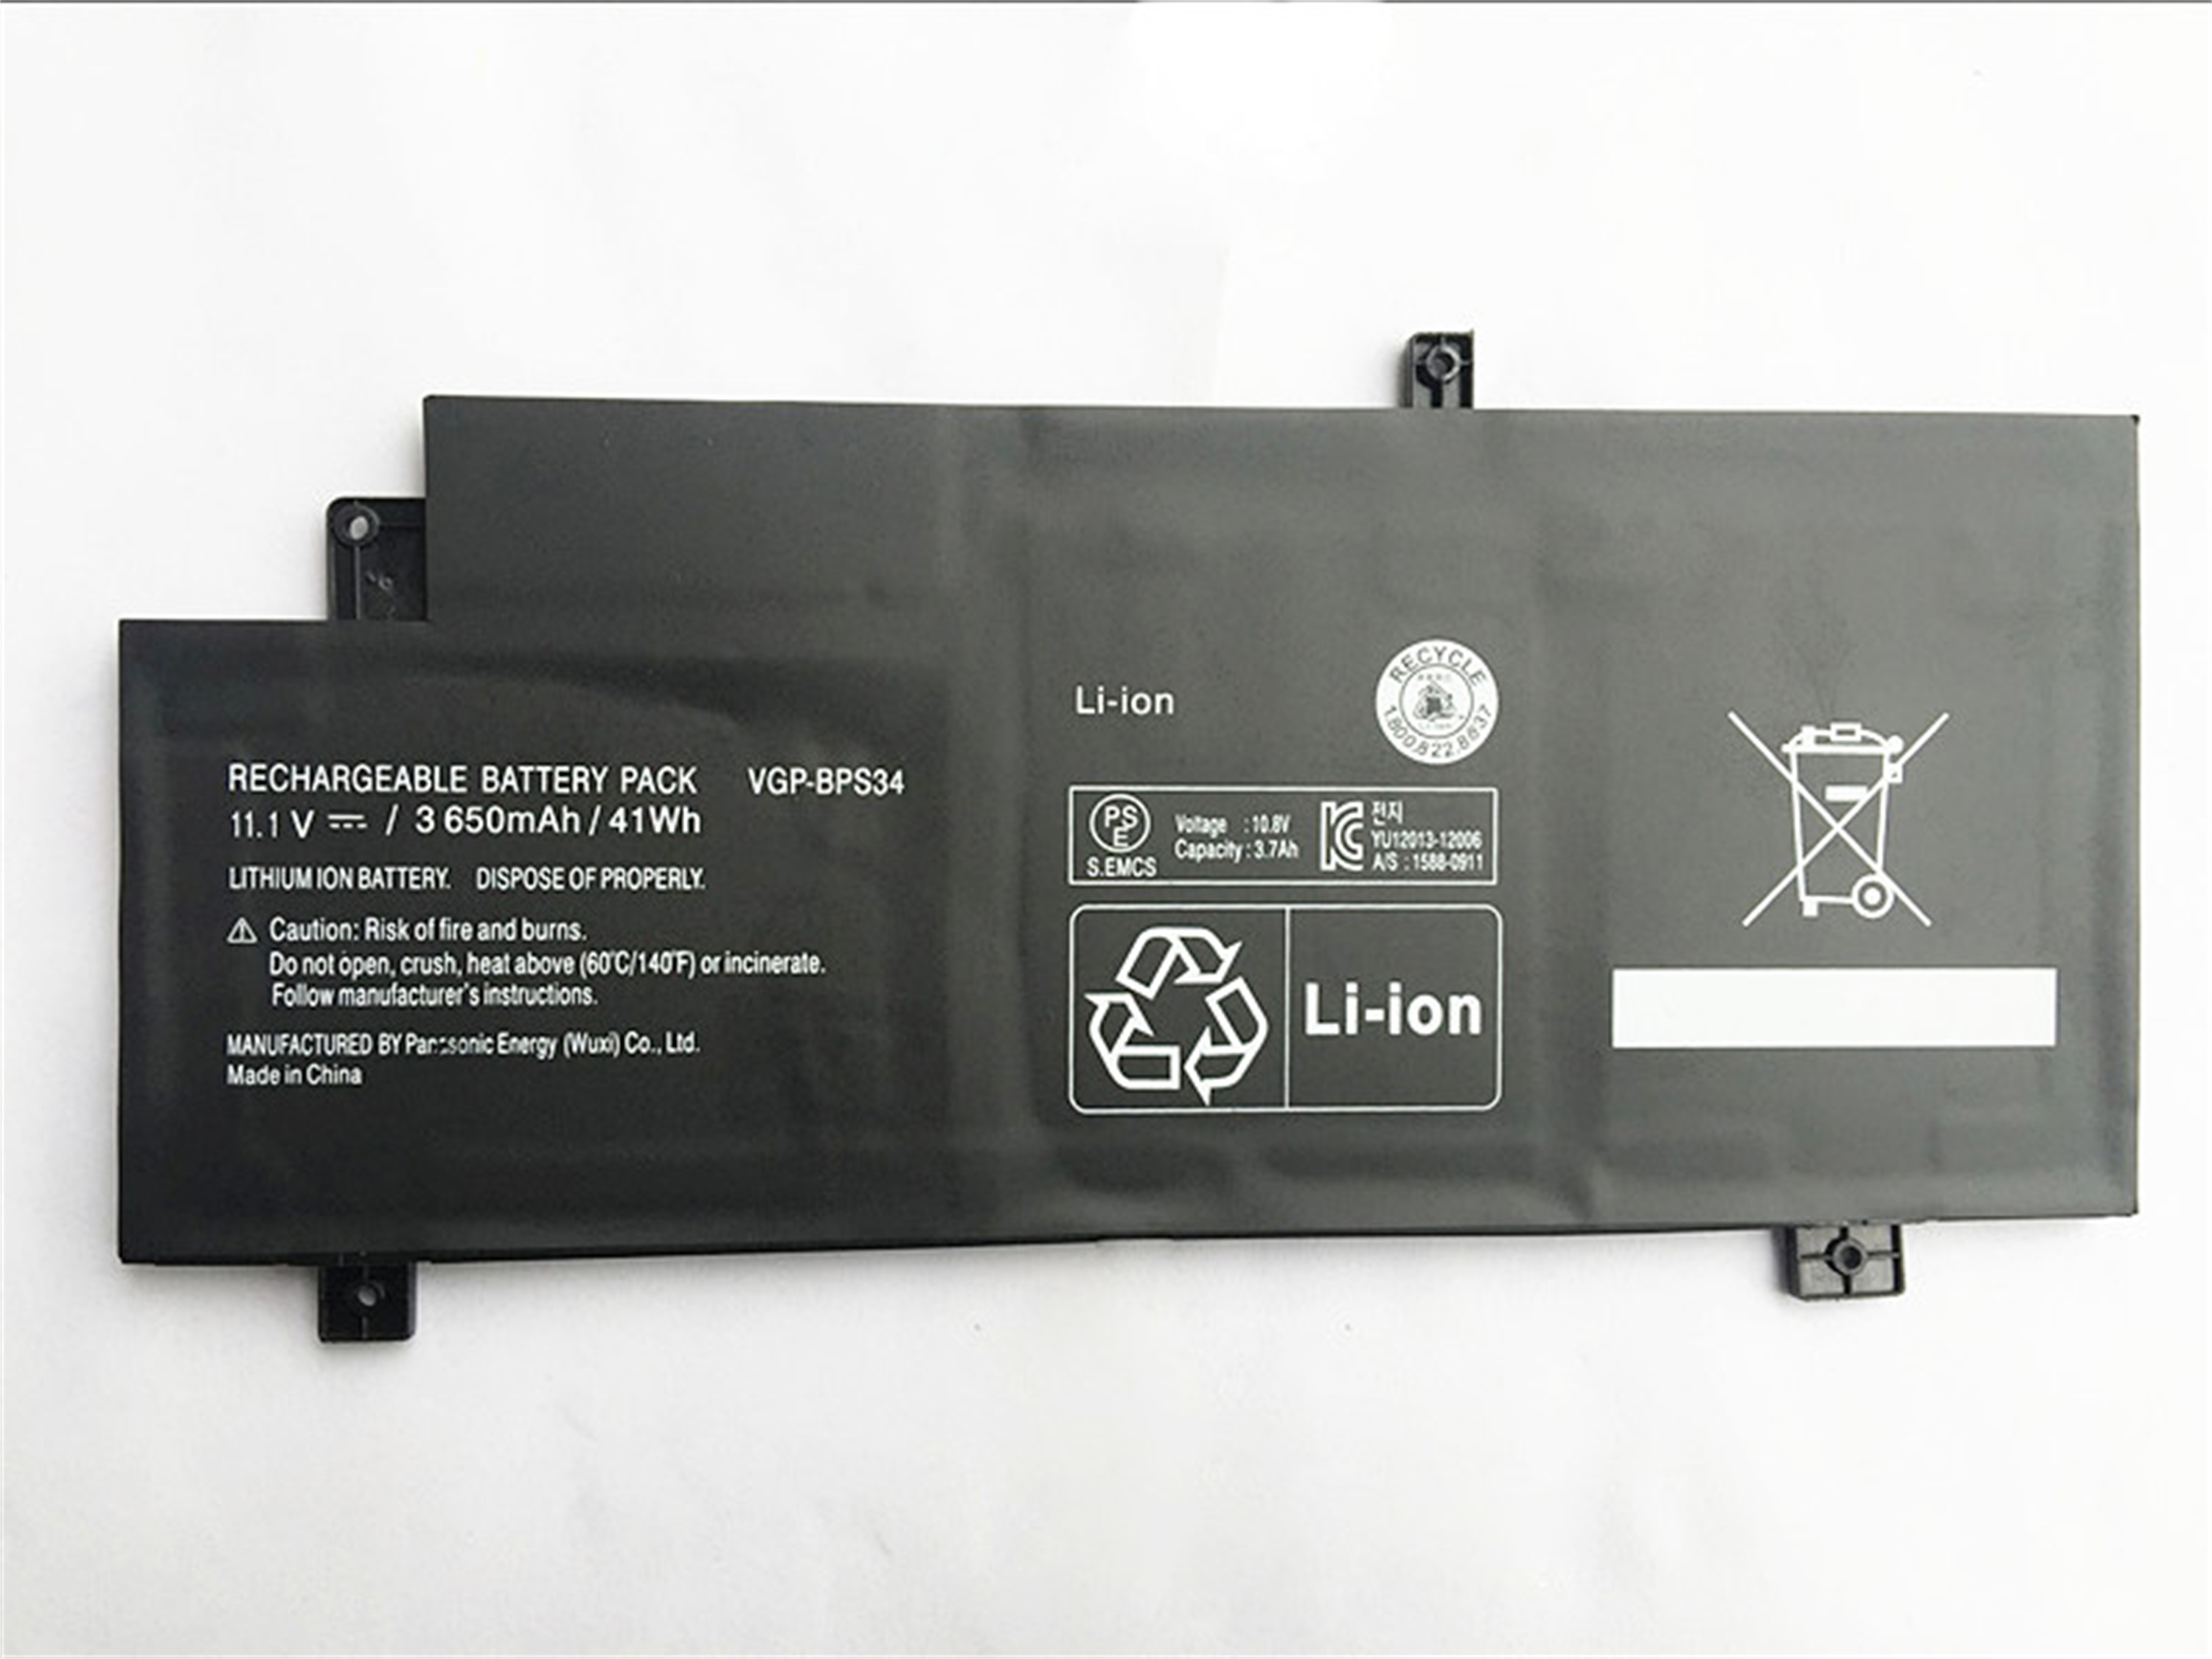 VGP-BPS34 rechargeable lithium ion Notebook battery Laptop battery Portege SONY VAIO Fit 15 SVF15AA1LT SVF15A1 11.1V 41Wh 3650mAh8 SVF15A19SCB SVF15A16SCB SVF15A100C